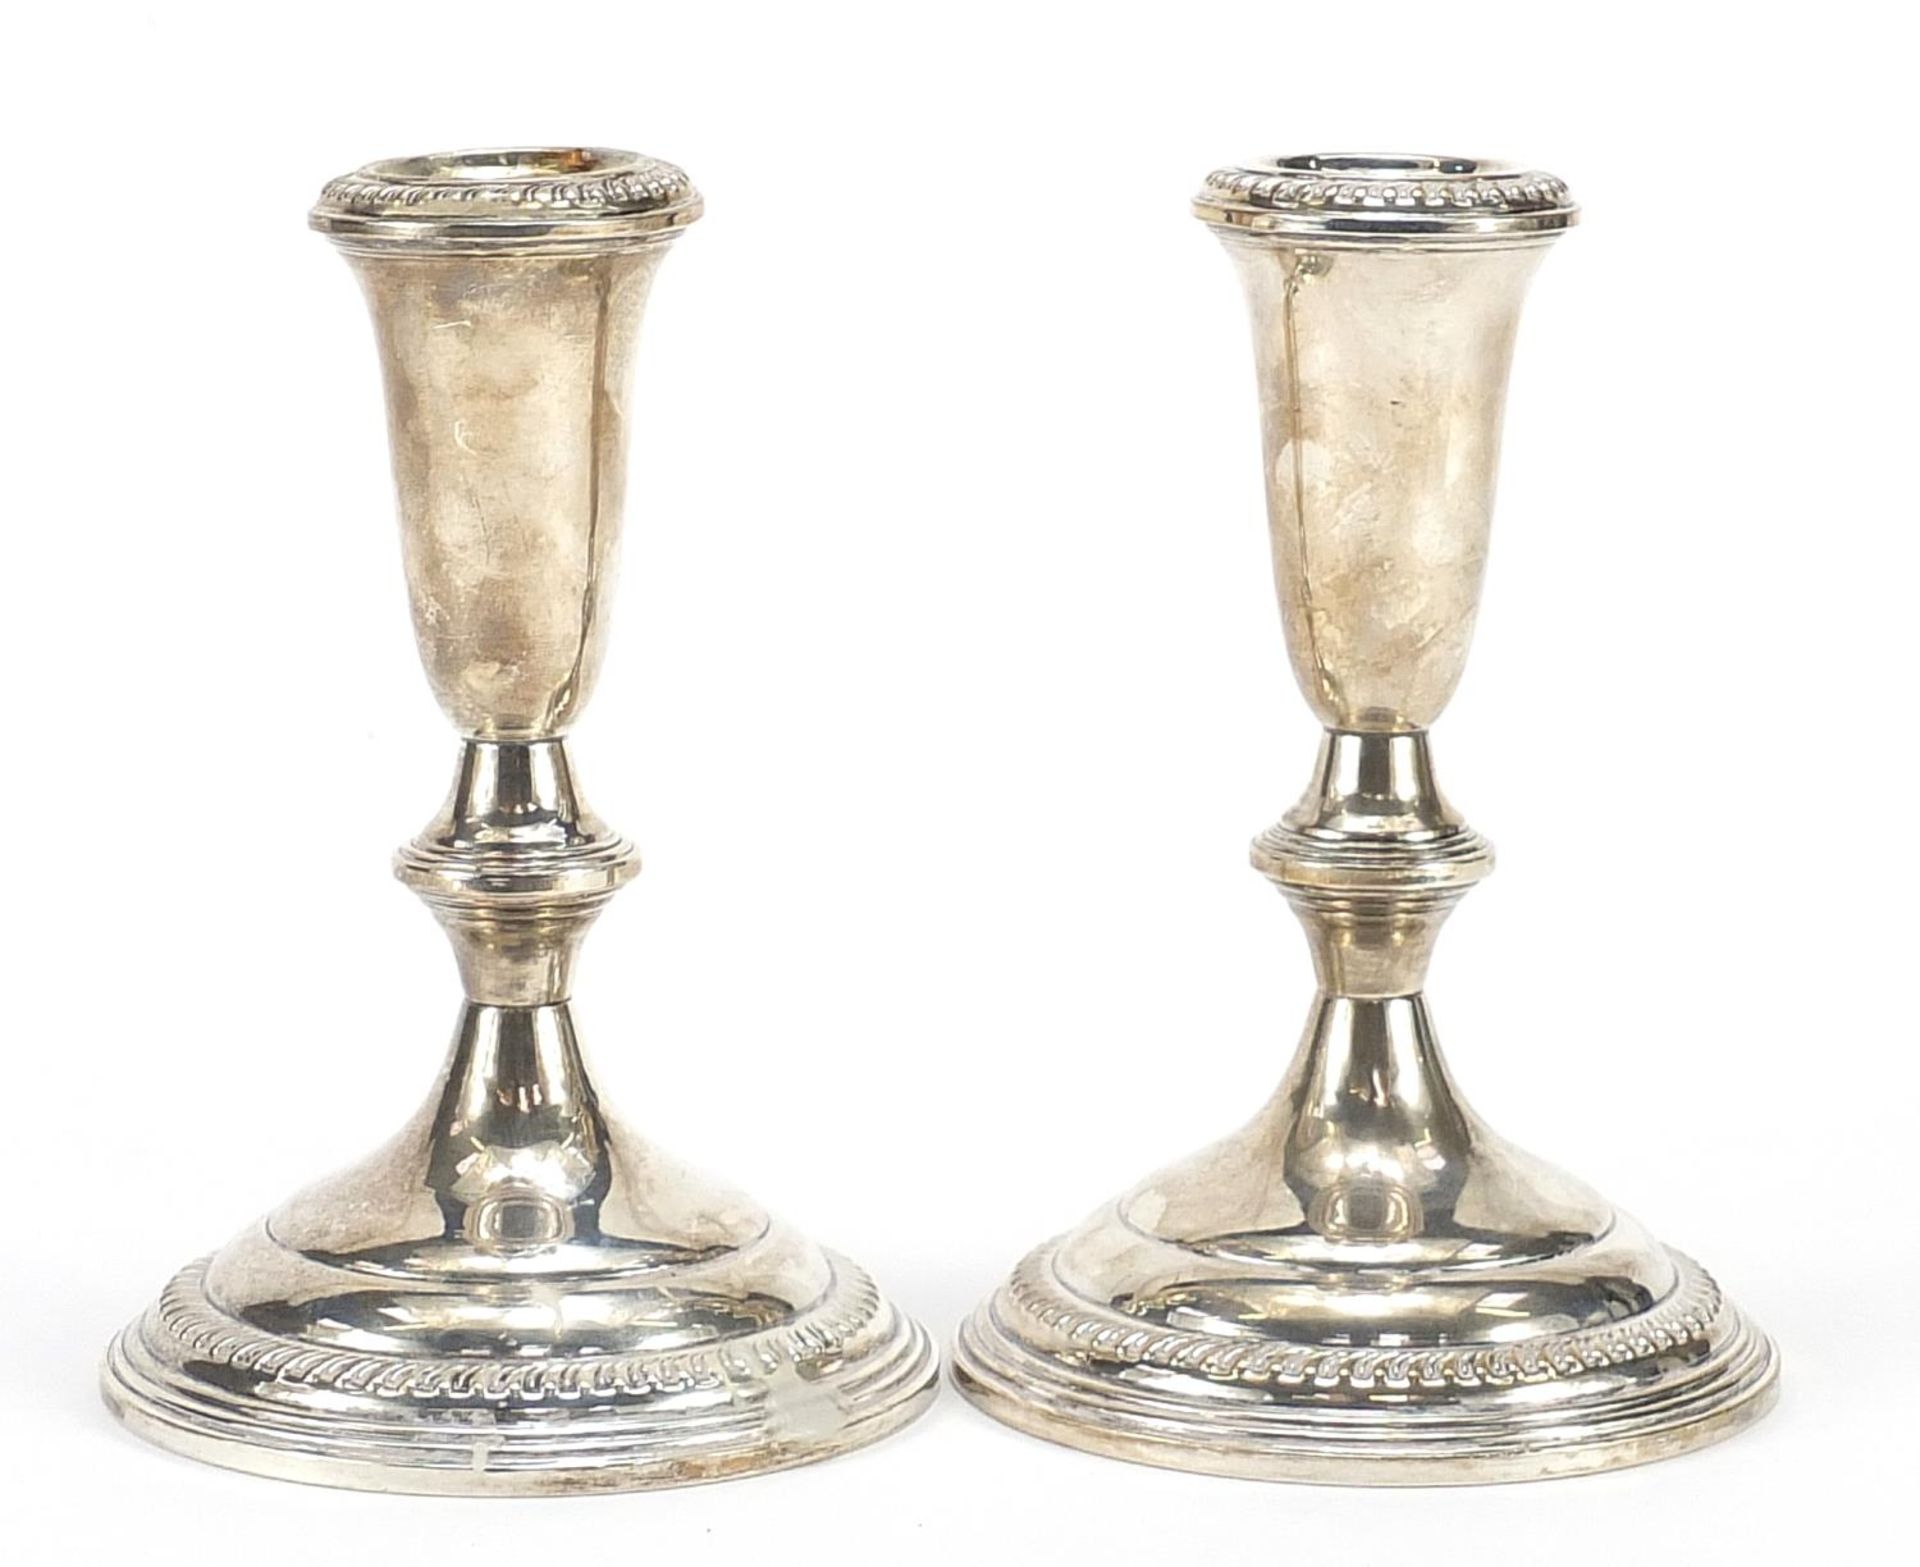 Pair of sterling silver weighted candlesticks, 14cm high, 775.0g